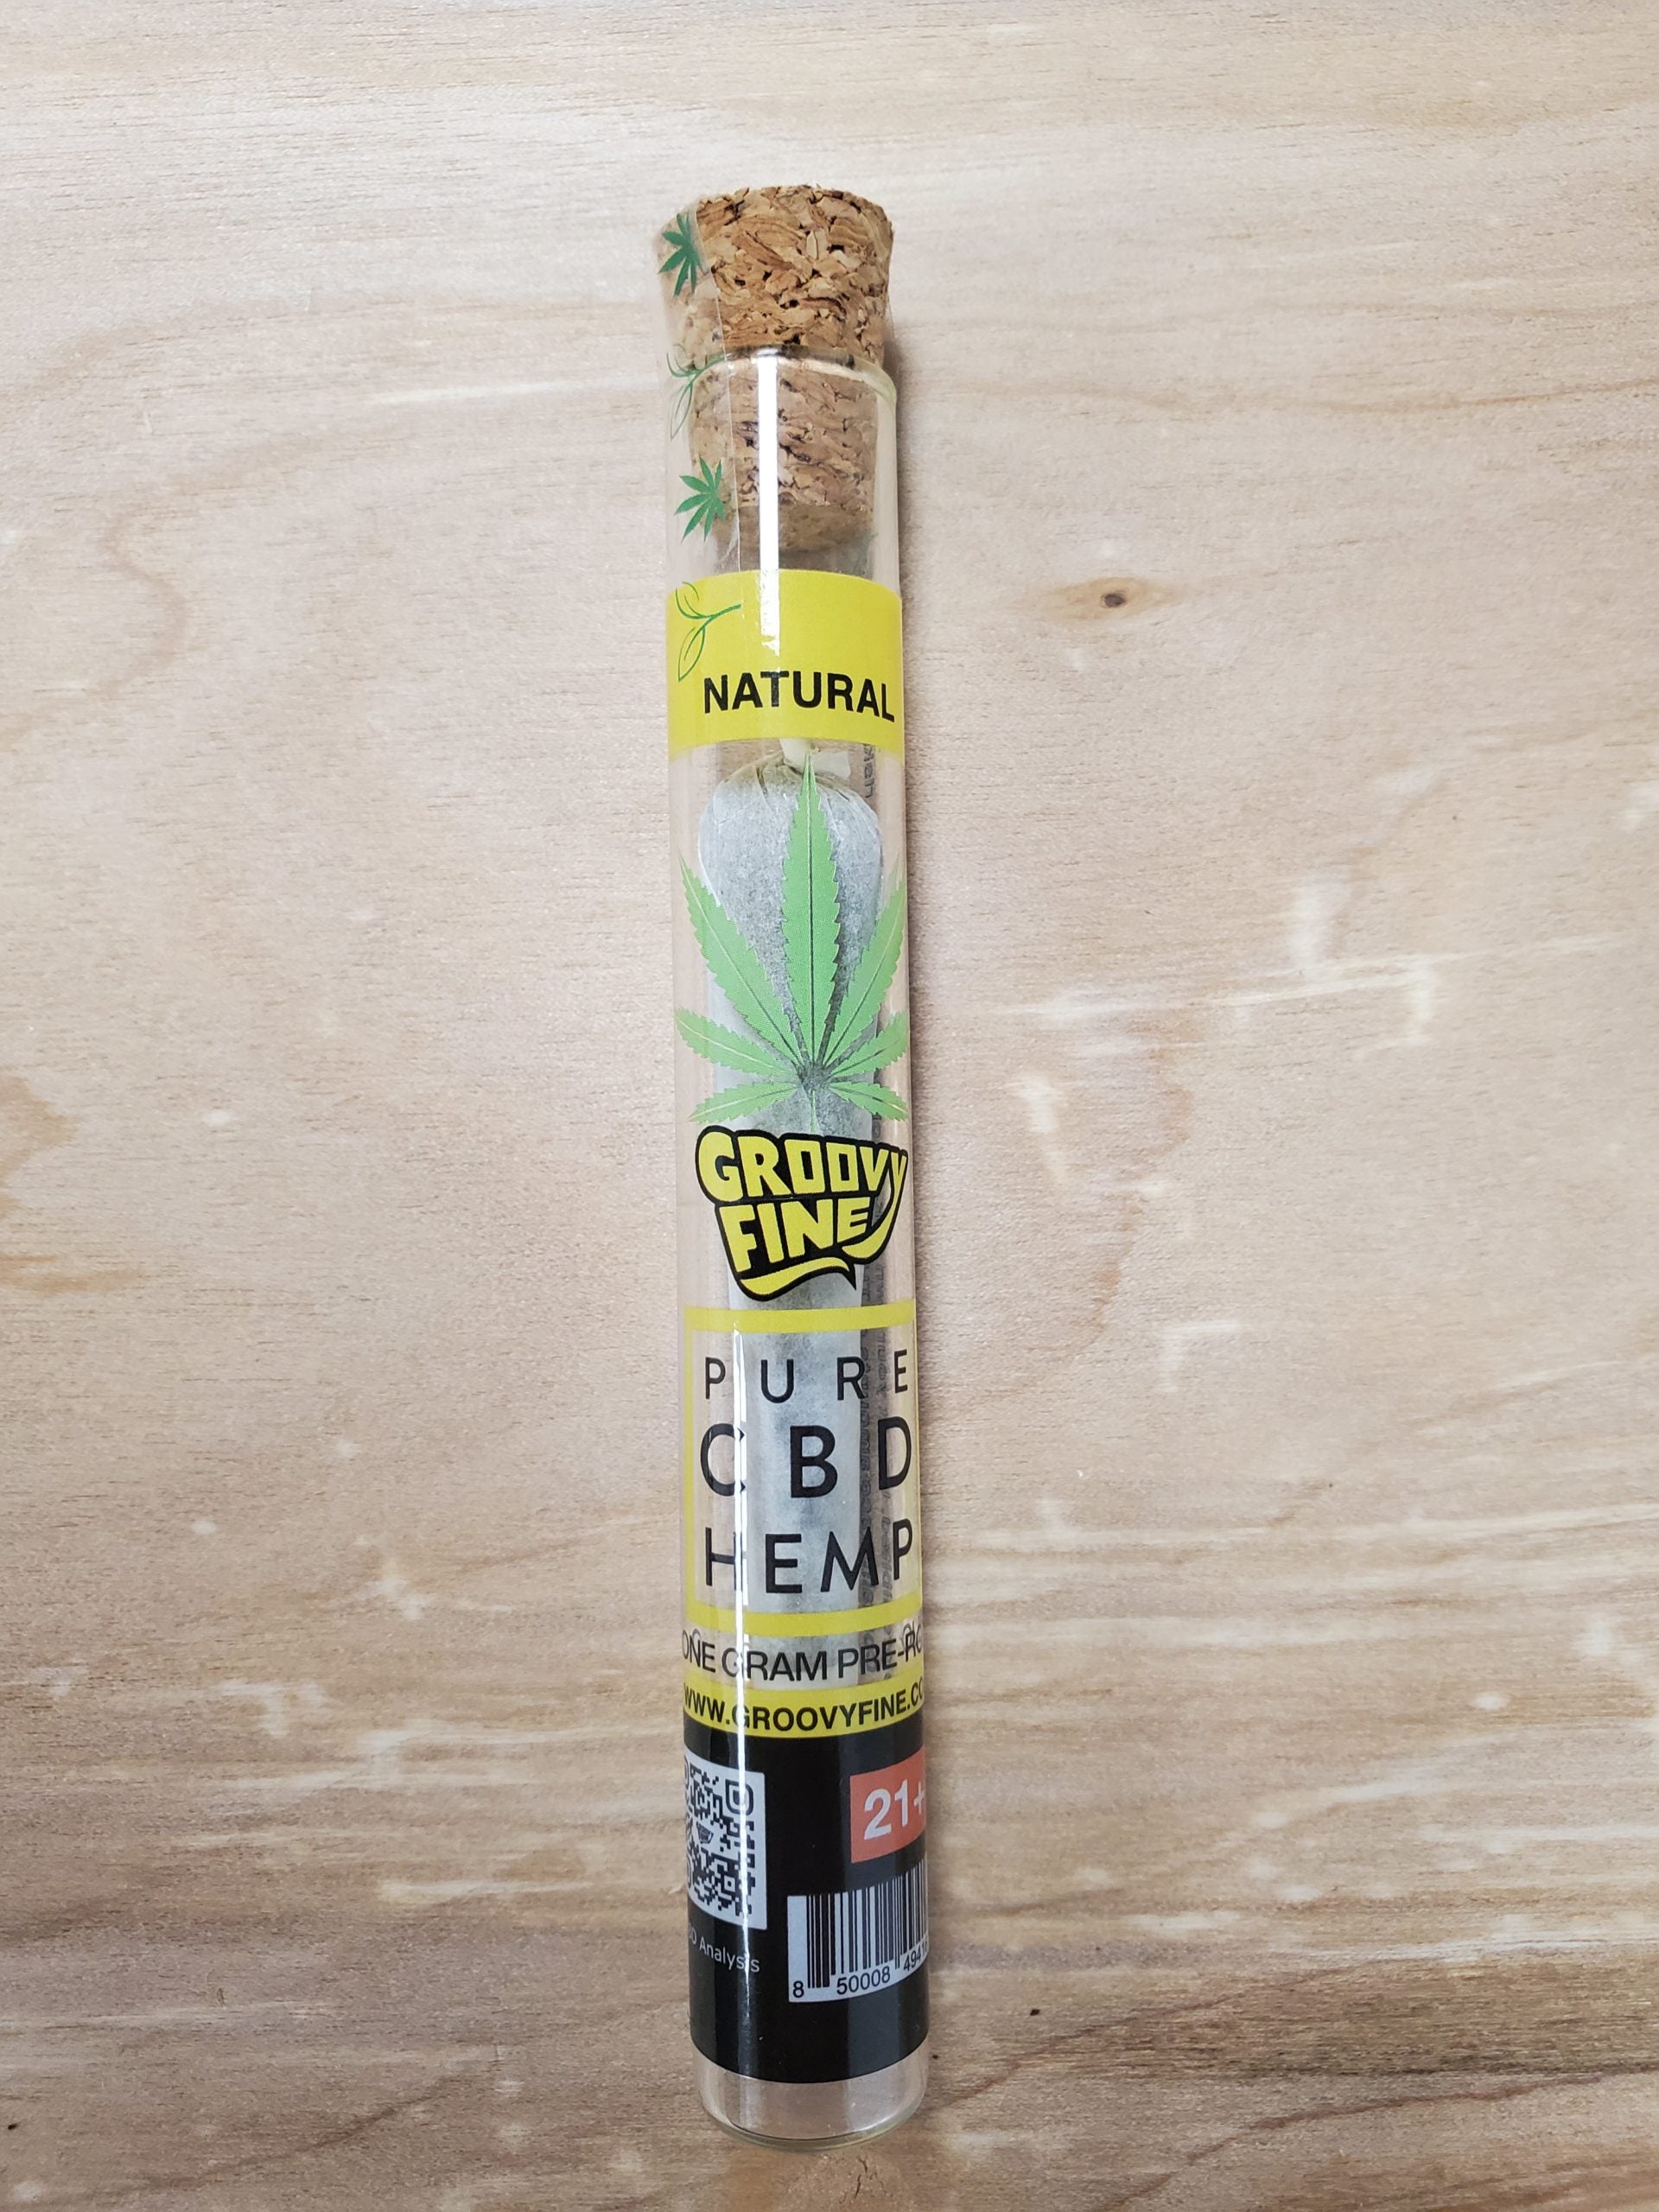 Groovy Fine Natural Pre Roll yoga smokes yoga studio, delivery, delivery near me, yoga smokes smoke shop, find smoke shop, head shop near me, yoga studio, headshop, head shop, local smoke shop, psl, psl smoke shop, smoke shop, smokeshop, yoga, yoga studio, dispensary, local dispensary, smokeshop near me, port saint lucie, florida, port st lucie, lounge, life, highlife, love, stoned, highsociety. Yoga Smokes